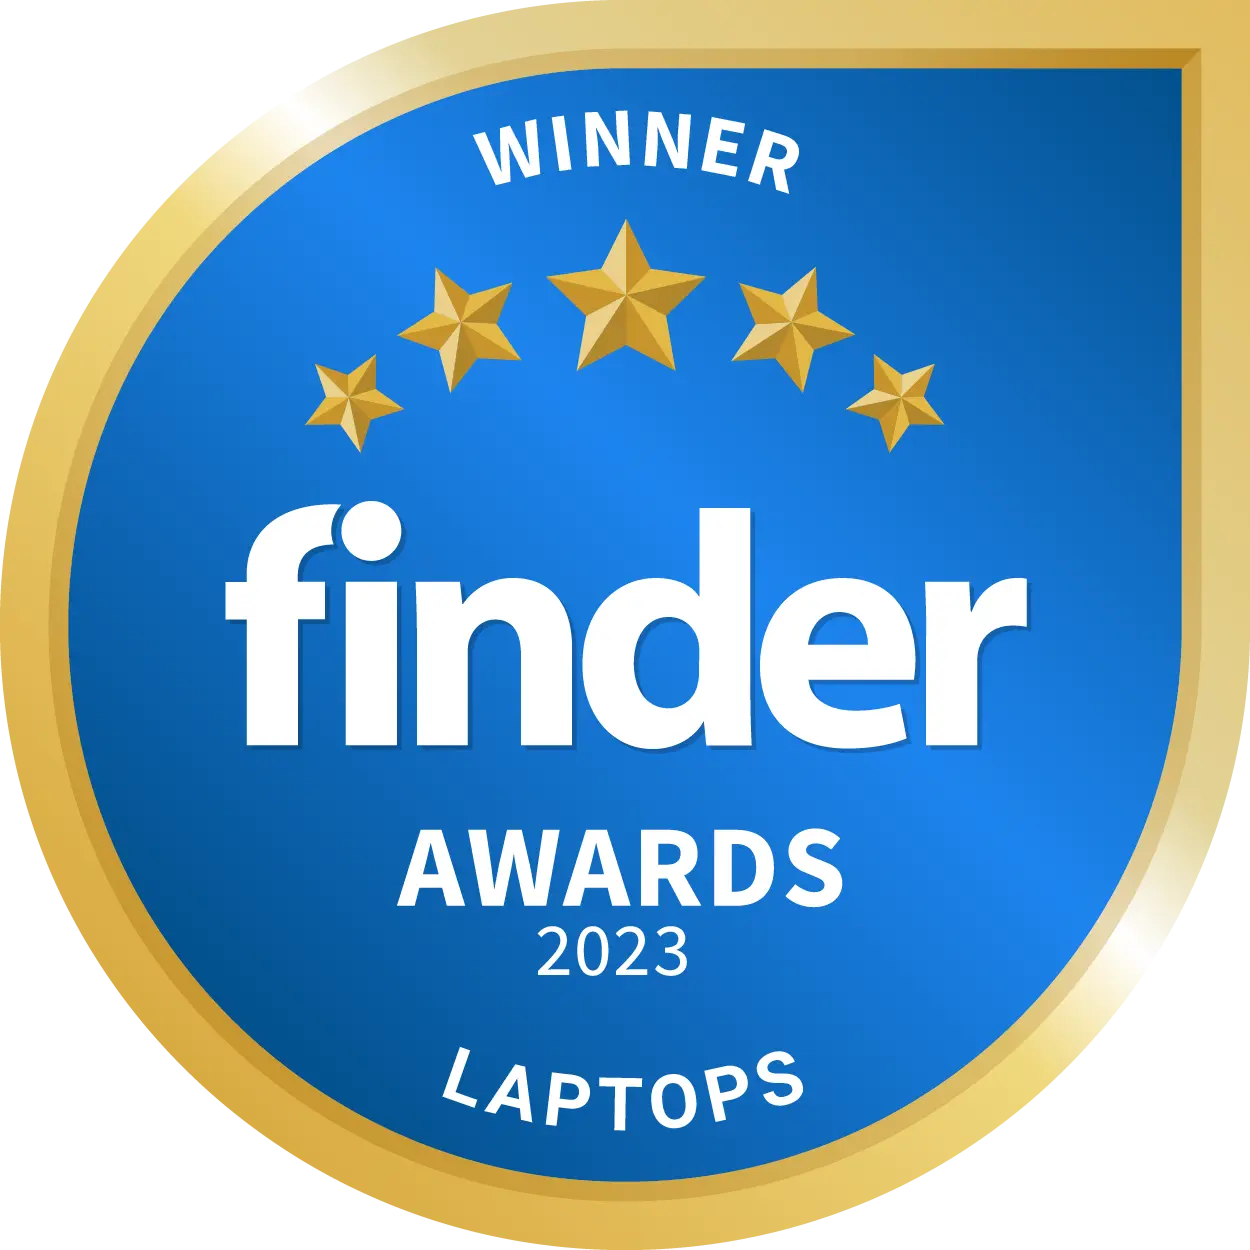 Best-rated laptop brand